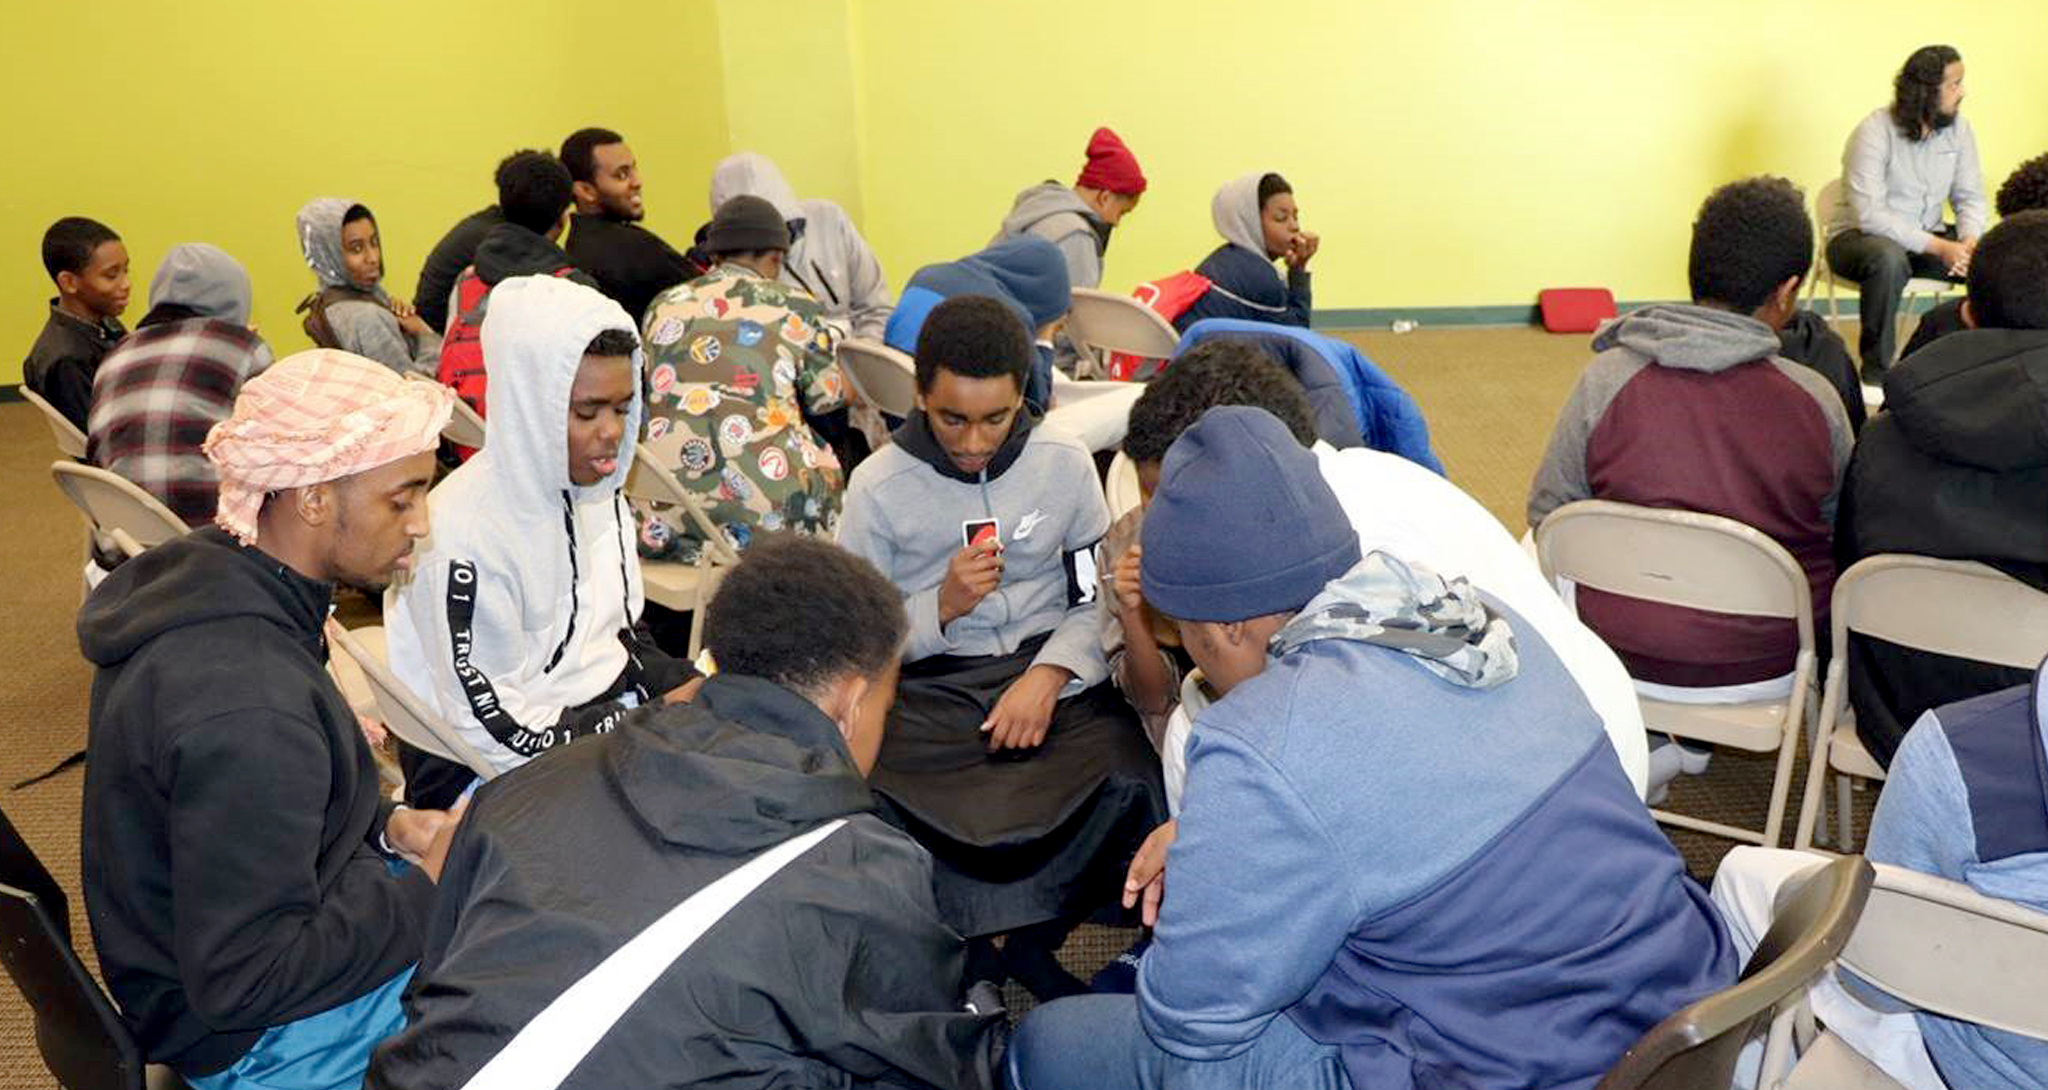 Staff from Metro Youth Diversion Center work with youth